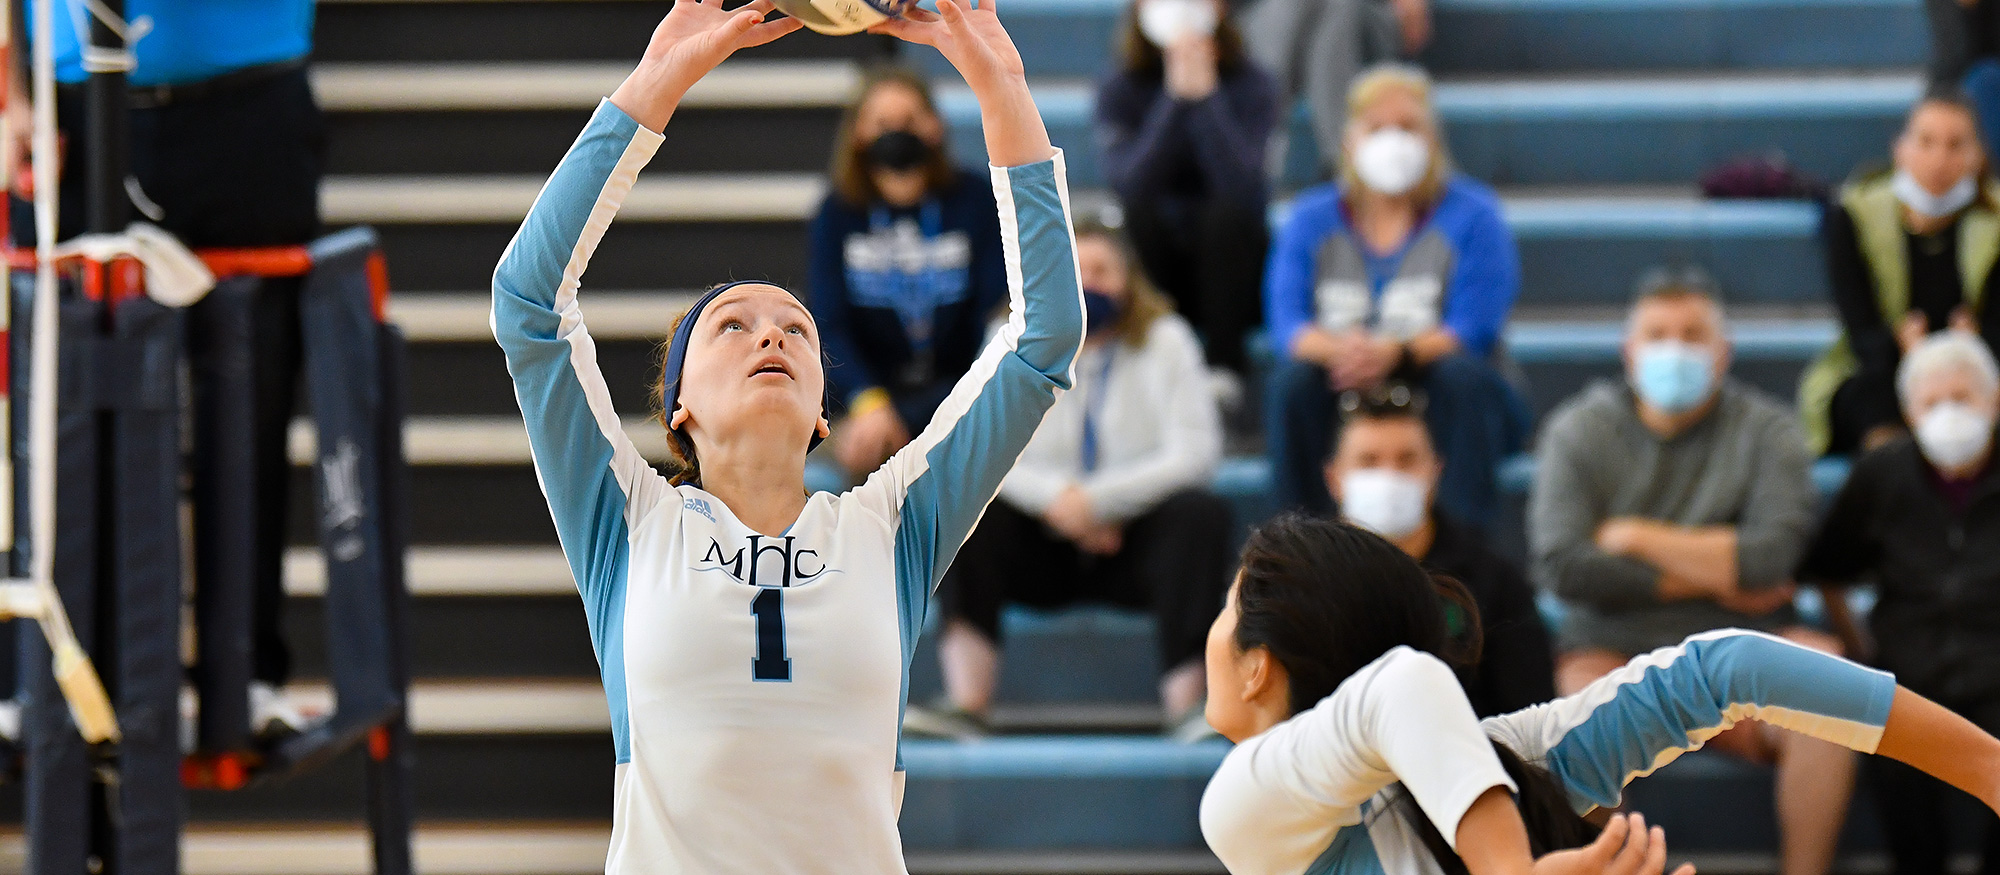 Sadie Duffrin had 31 assists, eight aces, three kills and 10 digs in Mount Holyoke's 3-1 win over MCLA on Sept. 7, 2023. (RJB Sports file photo)